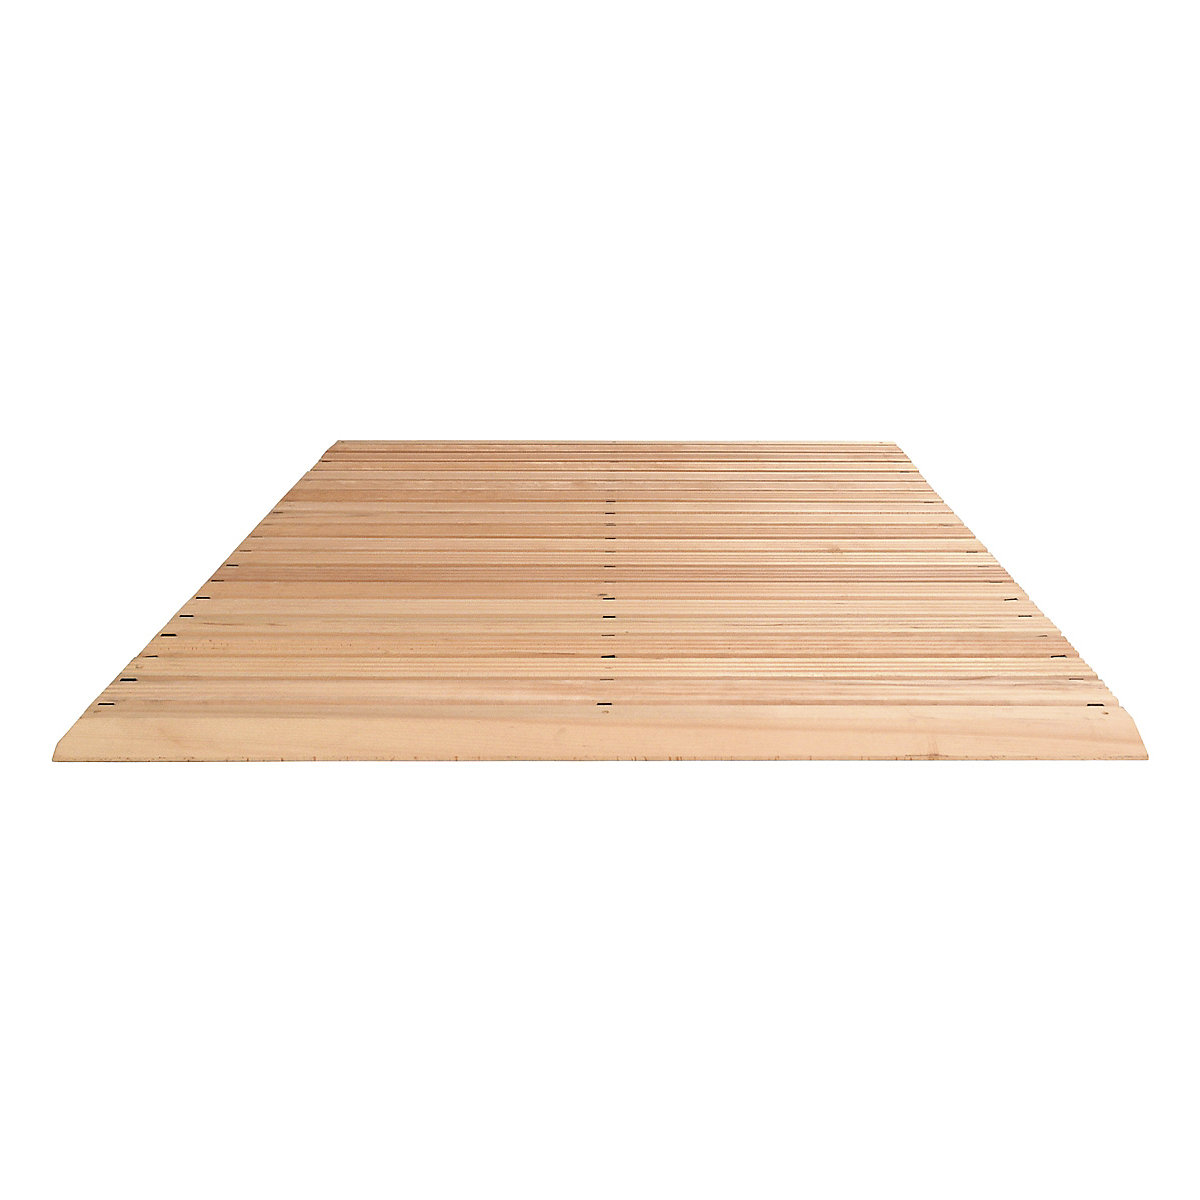 Wooden safety grid, per metre, with bevelled edges on 3 sides, width 1500 mm